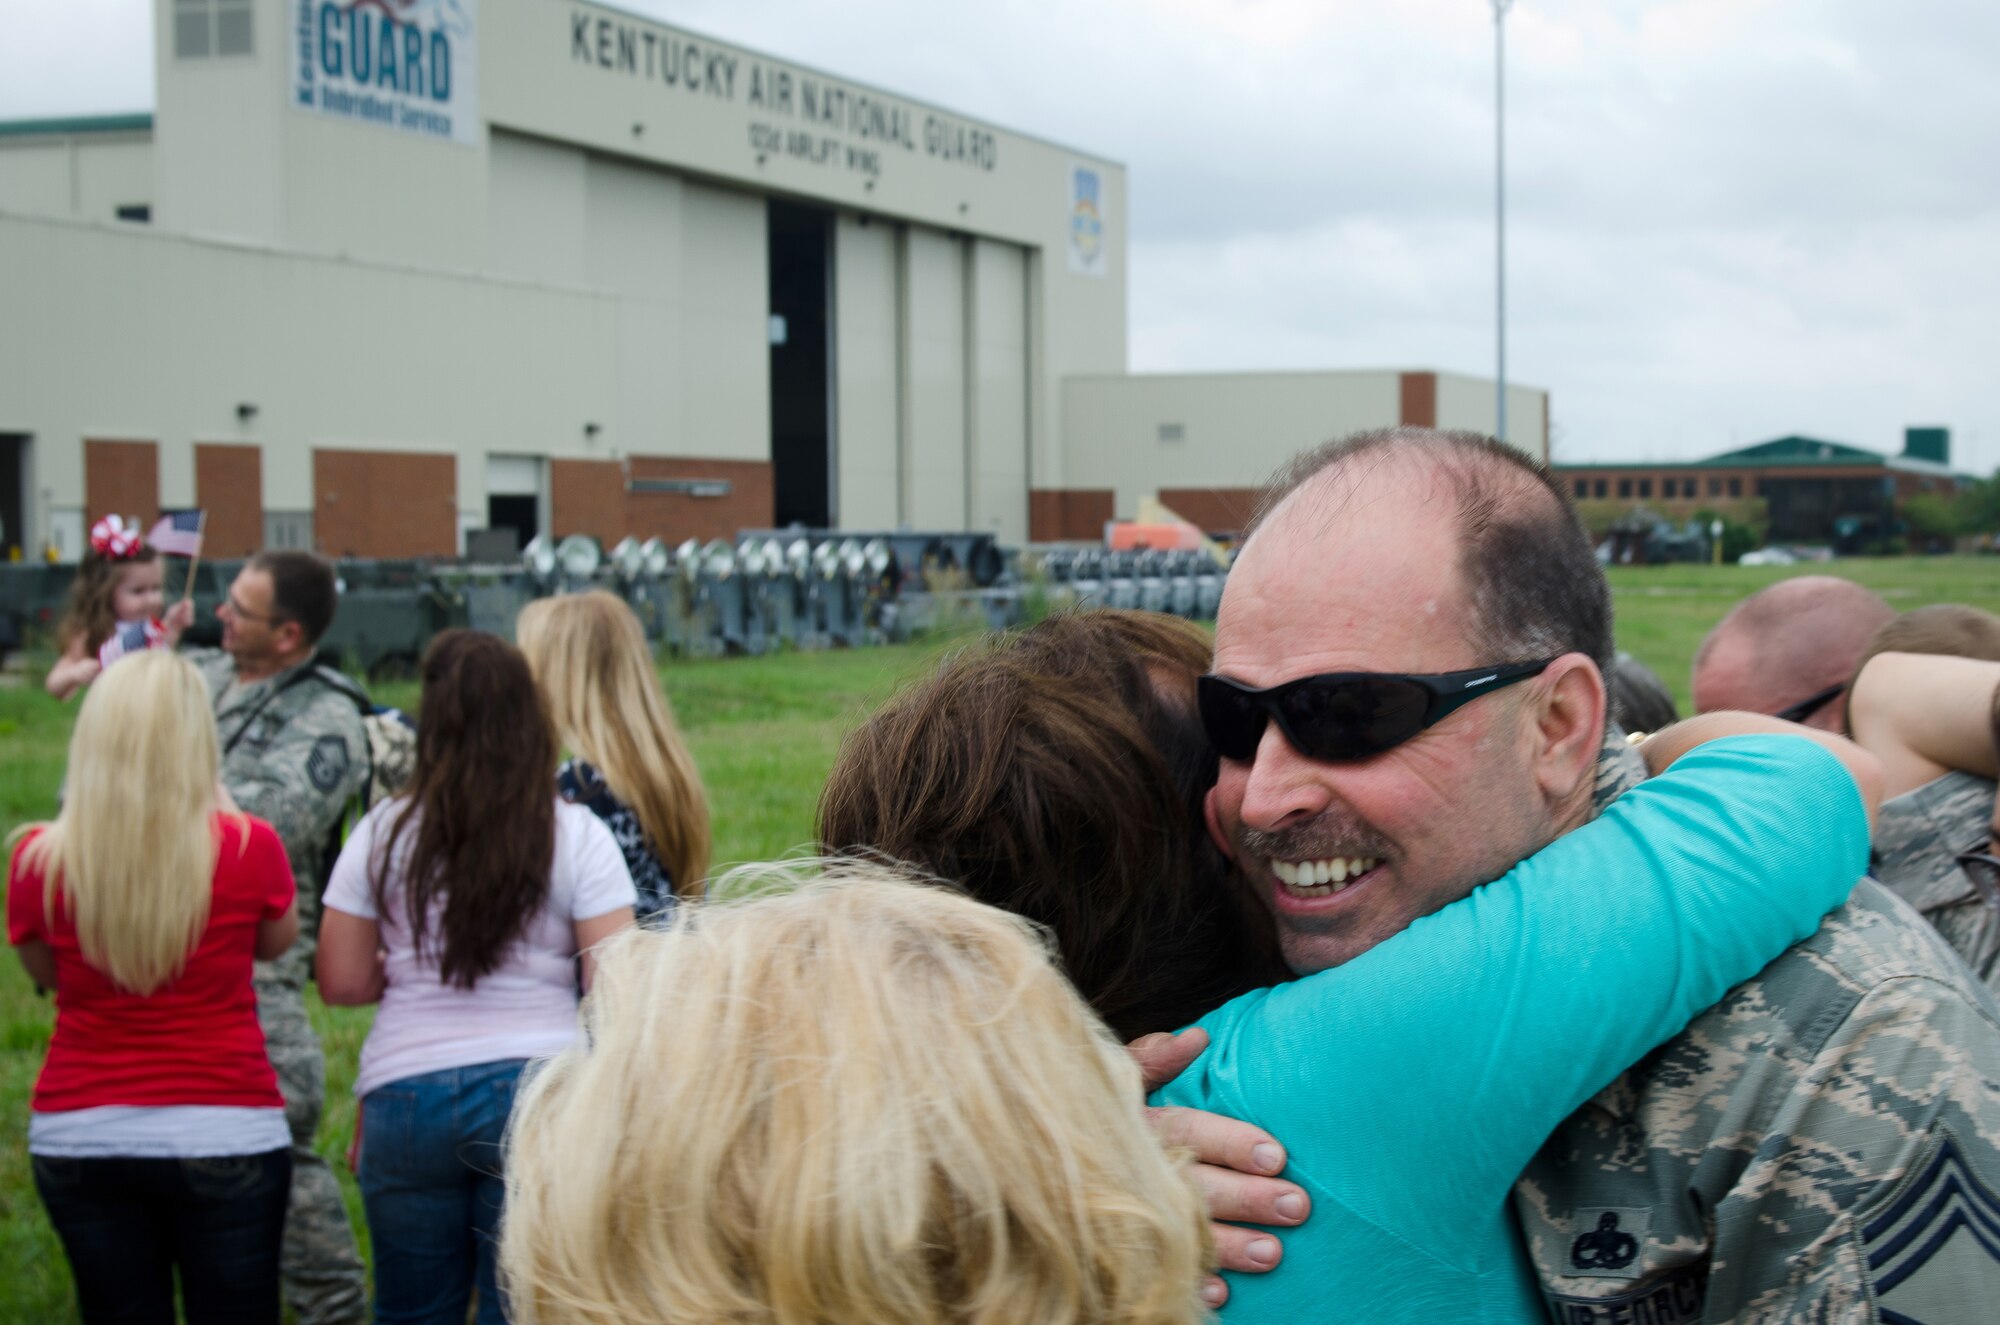 Chief Master Sergeant Steven Snawder, superintendent for the 123rd Aircraft Maintenance Squadron, hugs loved ones during a homecoming ceremony at the Kentucky Air National Guard Base in Louisville, Ky., July 8, 2015. Thirty Kentucky Air Guardsmen returned from a deployment to the Persian Gulf Region, where they’ve been supporting Operation Freedom’s Sentinel since February. (U.S. Air National Guard photo by Master Sgt. Phil Speck)